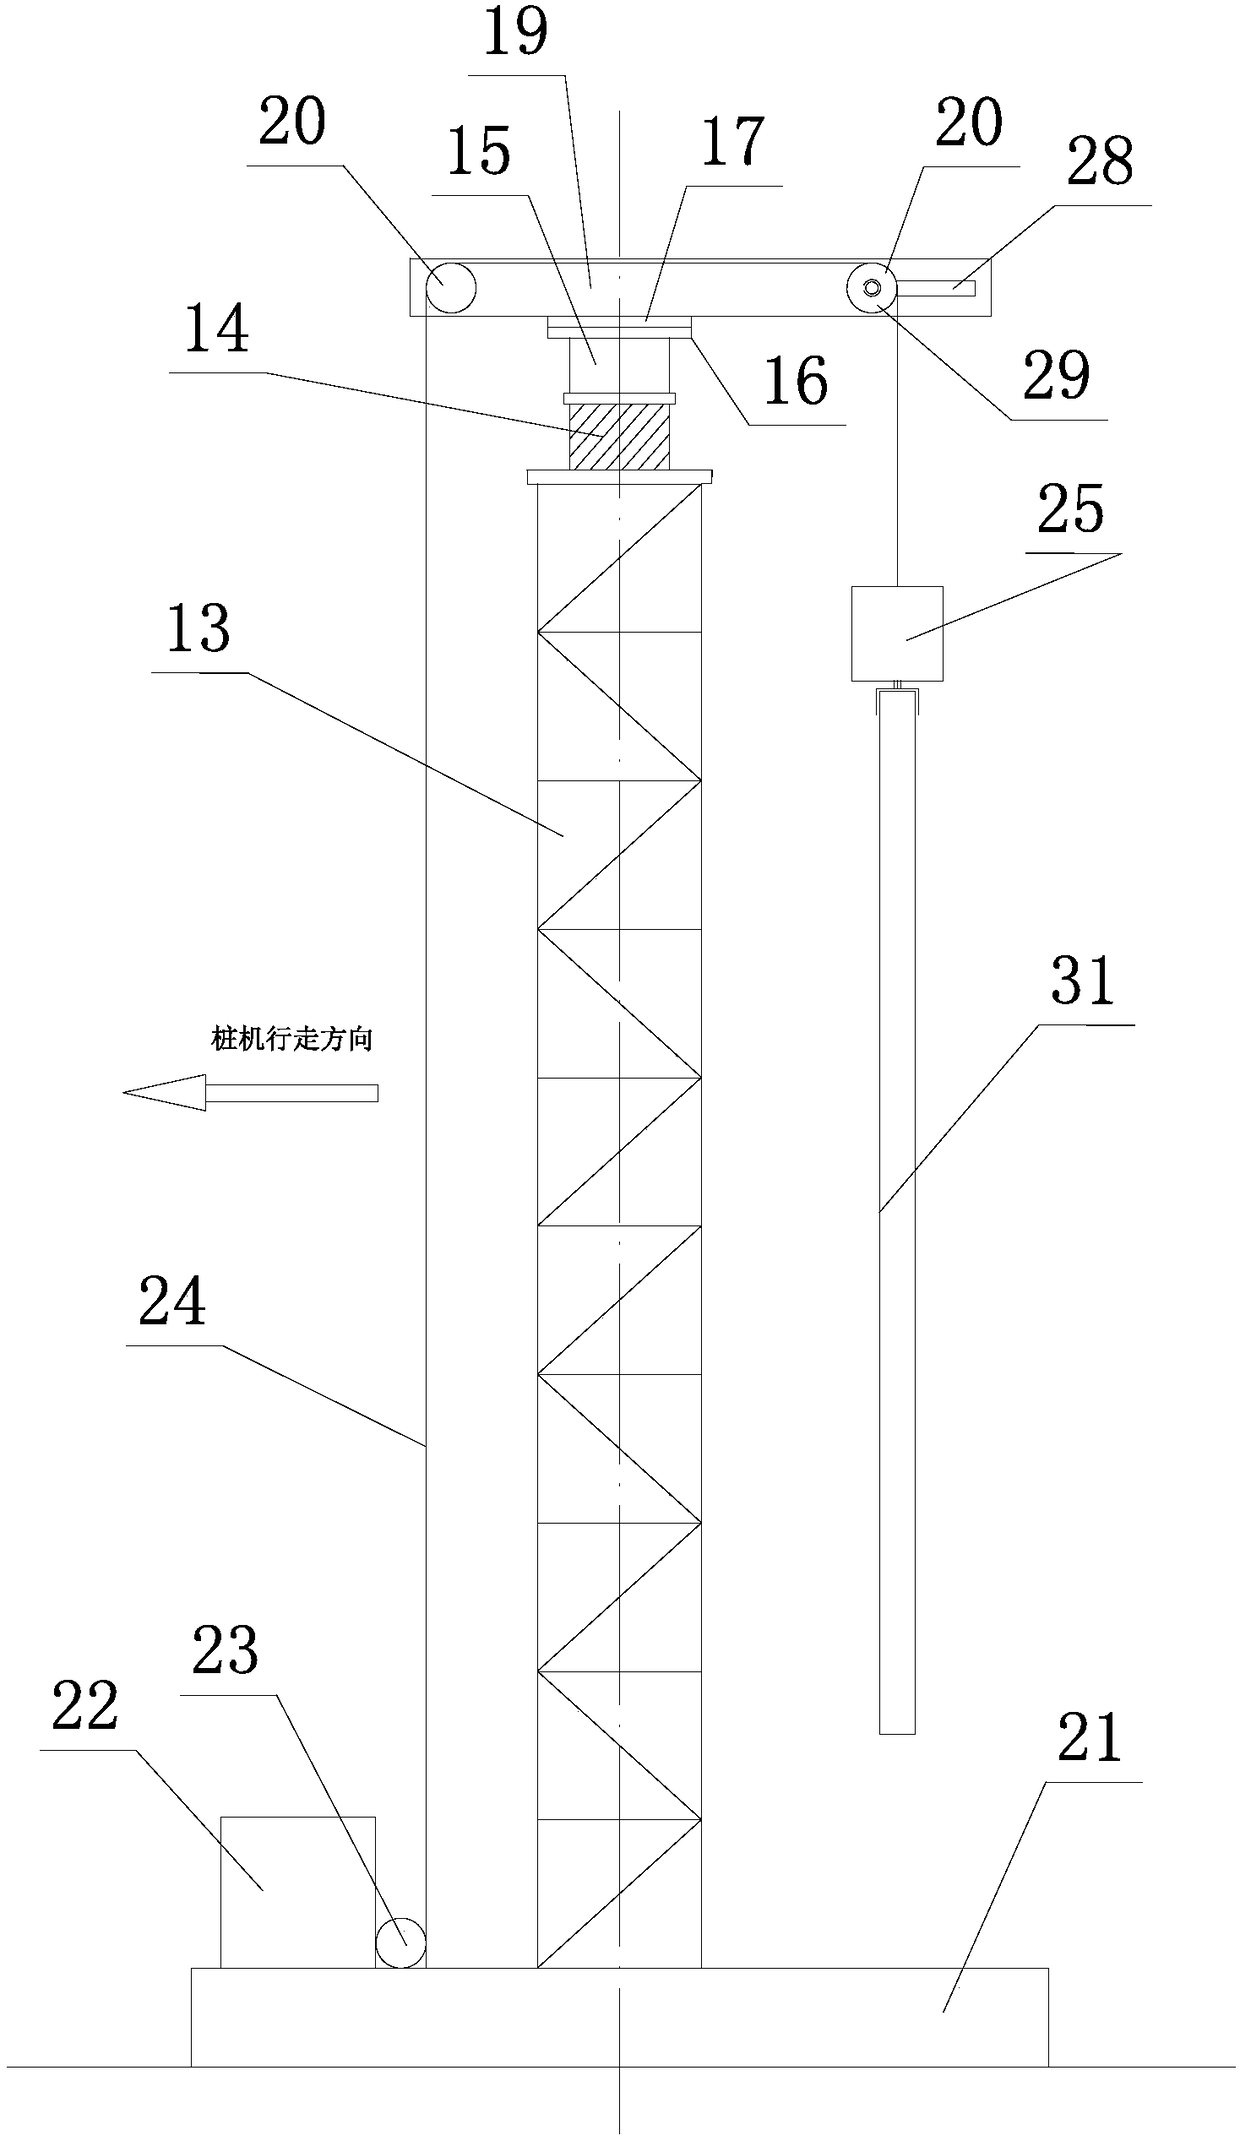 Multi-axial pressure cyclone-jet mixing pile driver and method for forming piles using the pile driver